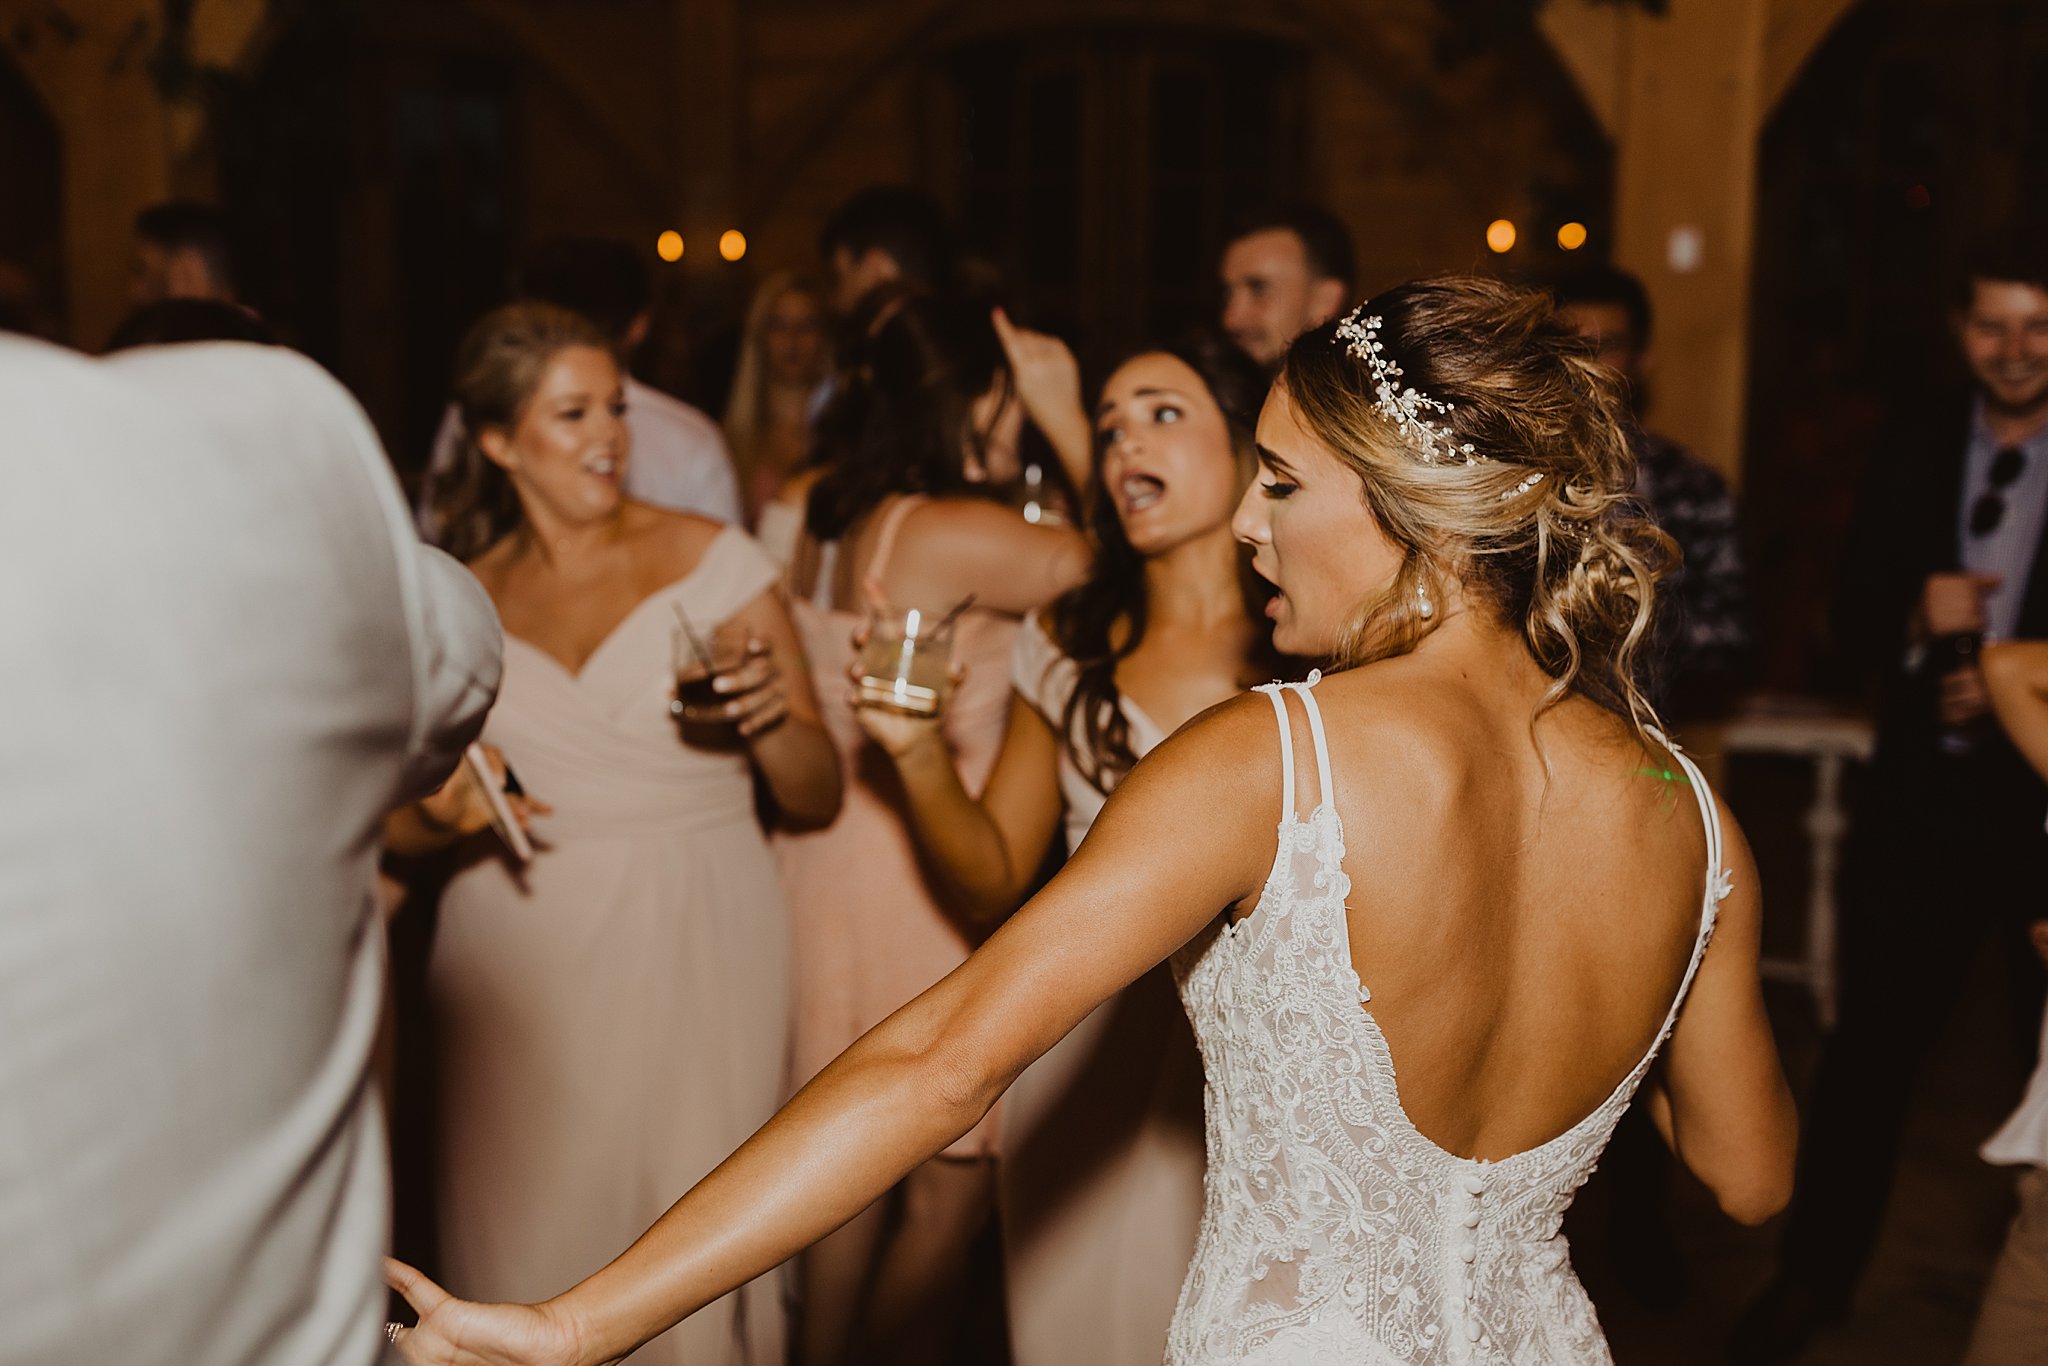 Dancing Photos | Stone House of St Charles Wedding